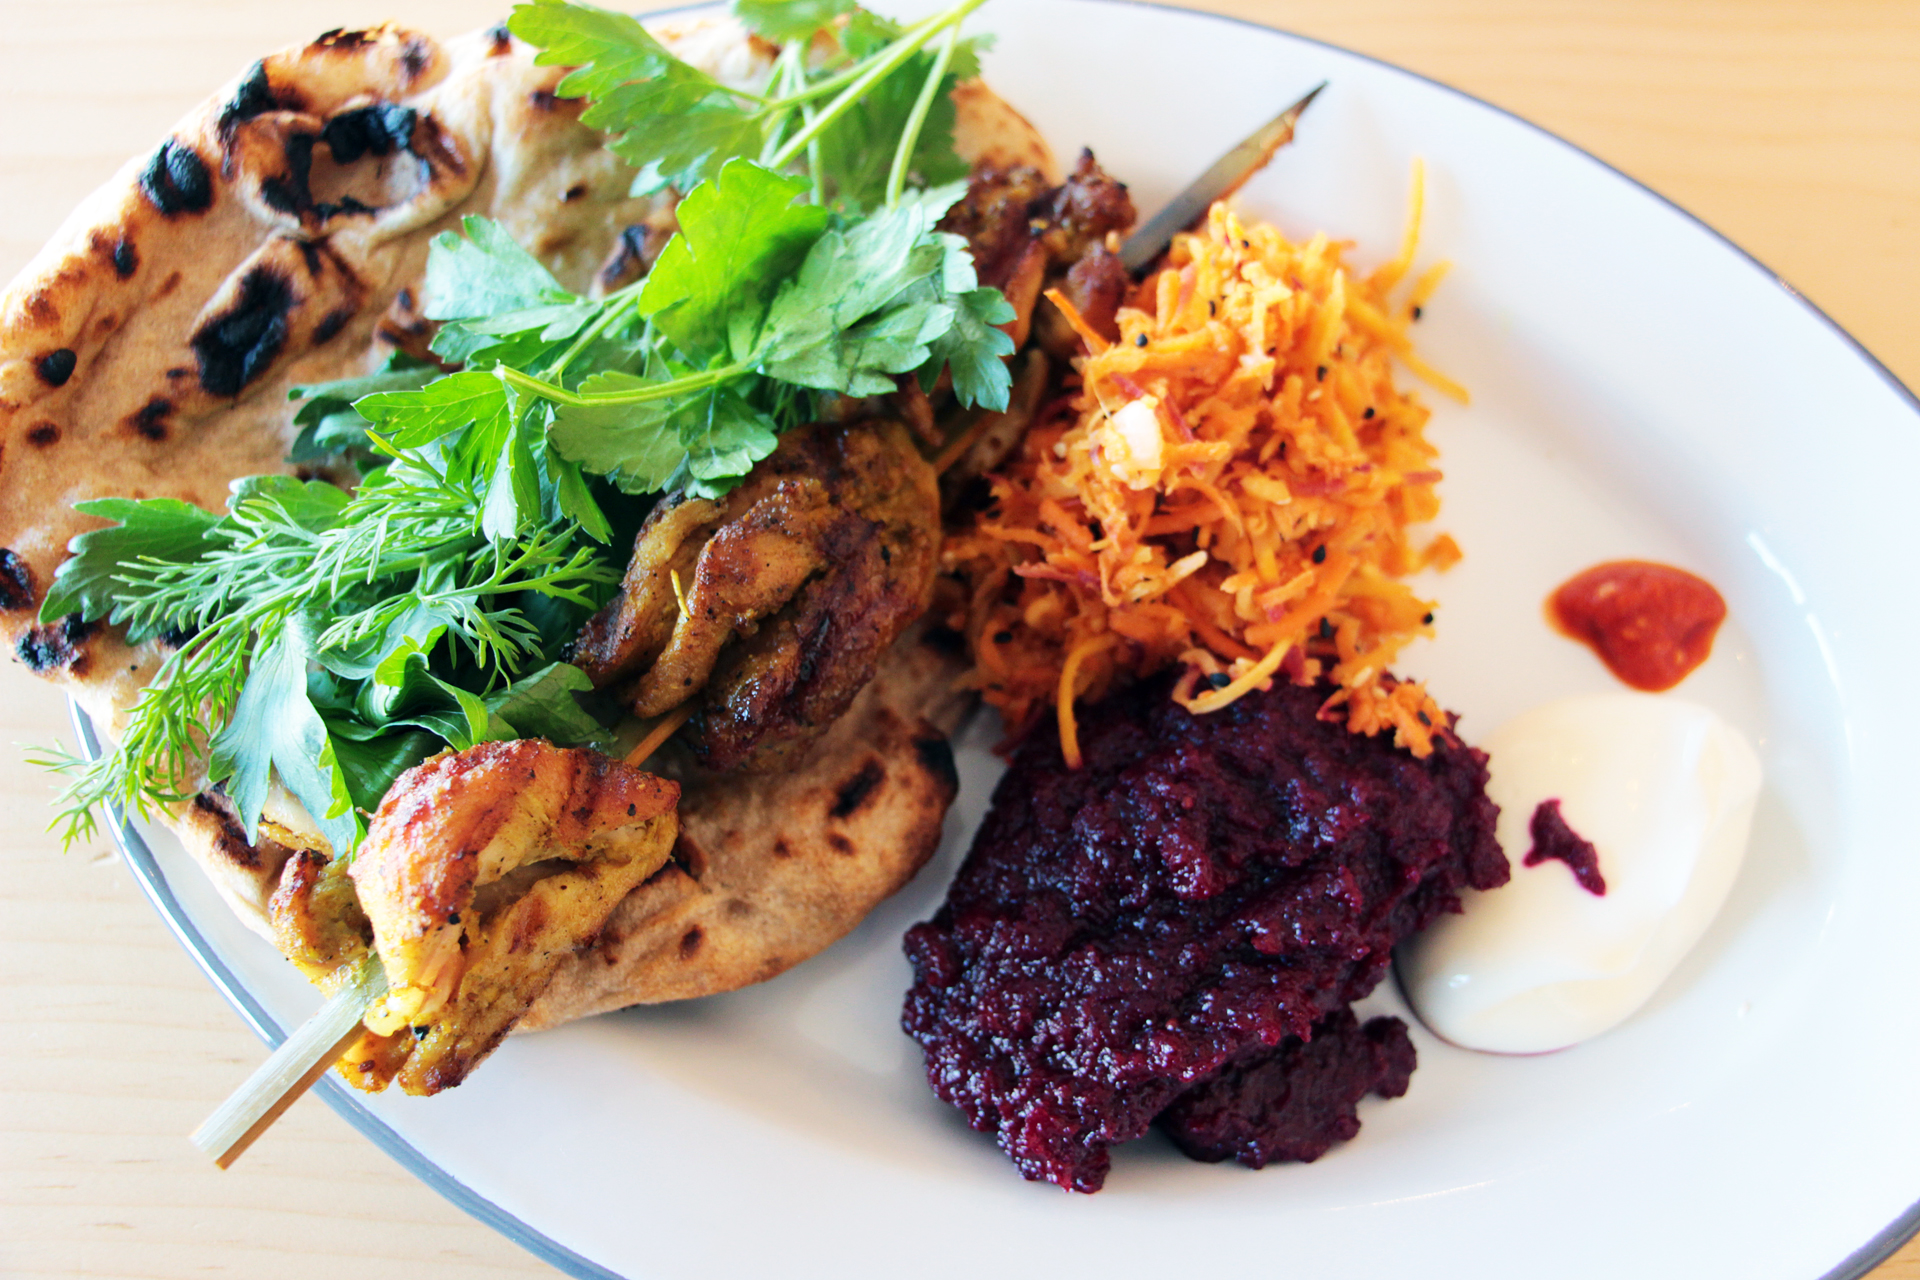 Chicken Kebab Plate, in a marinade of turmeric and other spices, grilled skin-on and served with flatbread, a raw carrot salad with caraway and mustard seeds and mashed beets.